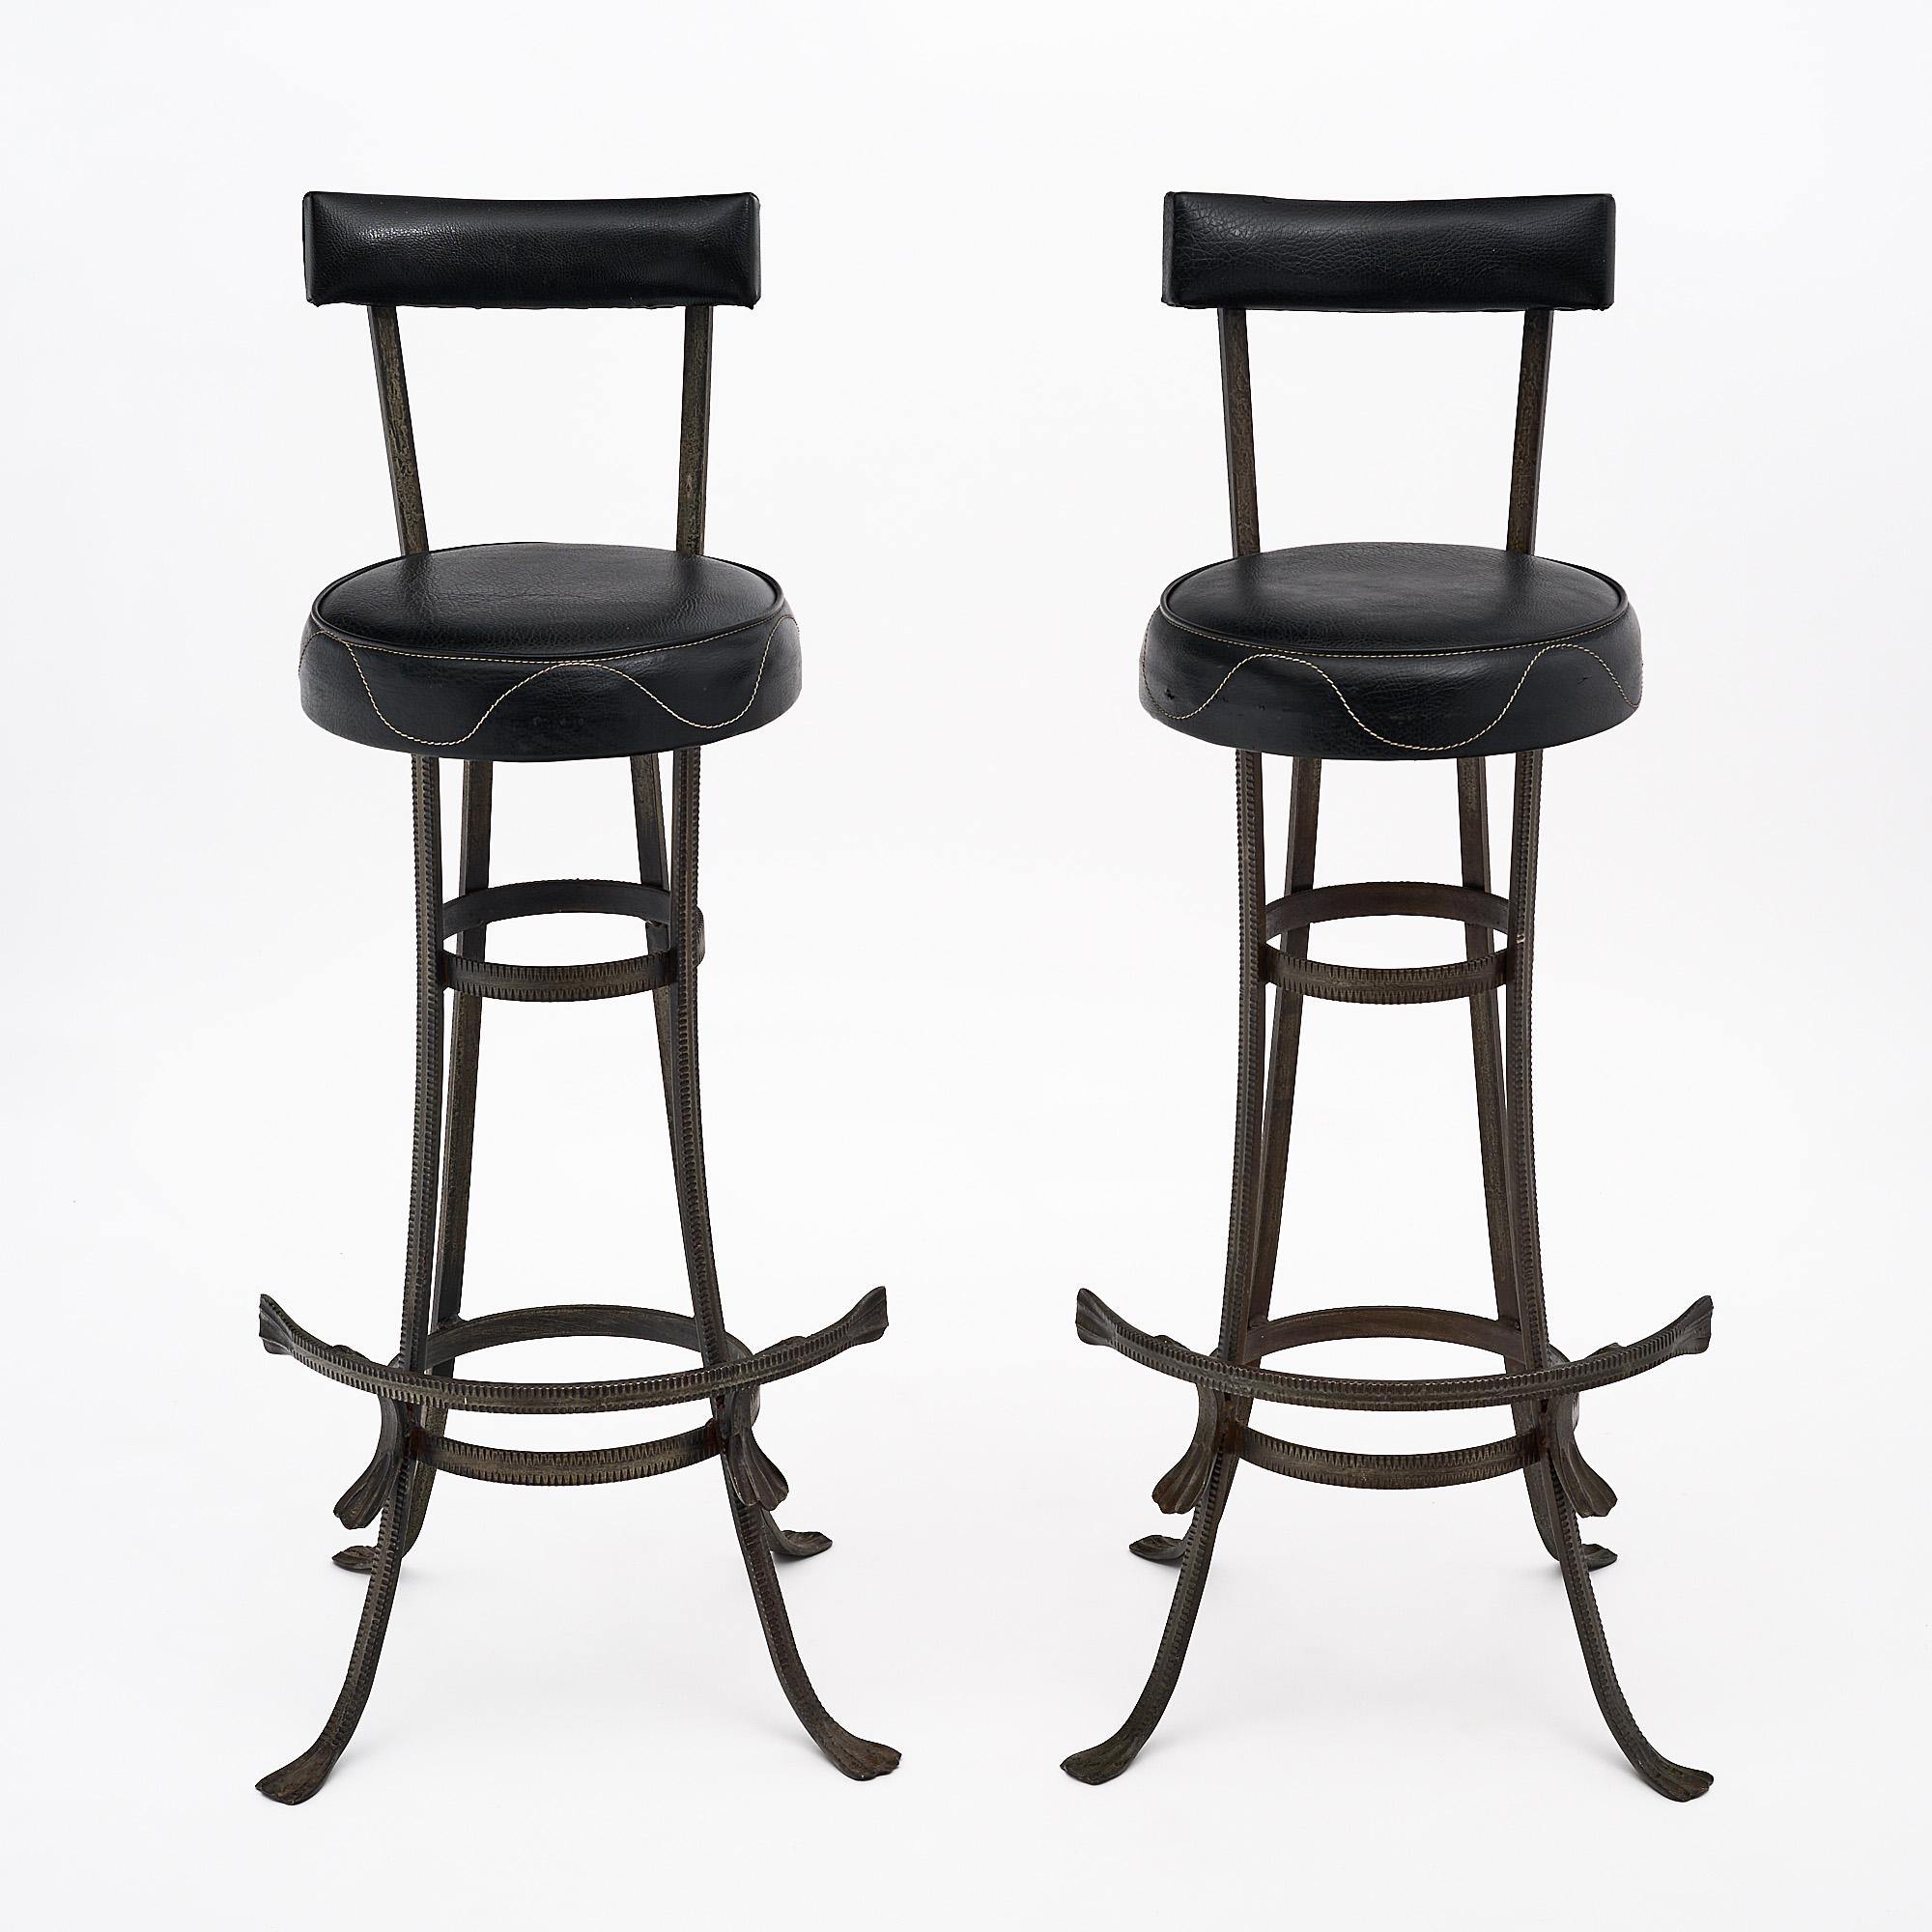 Forged French Art Deco Period Iron Bar and Stools